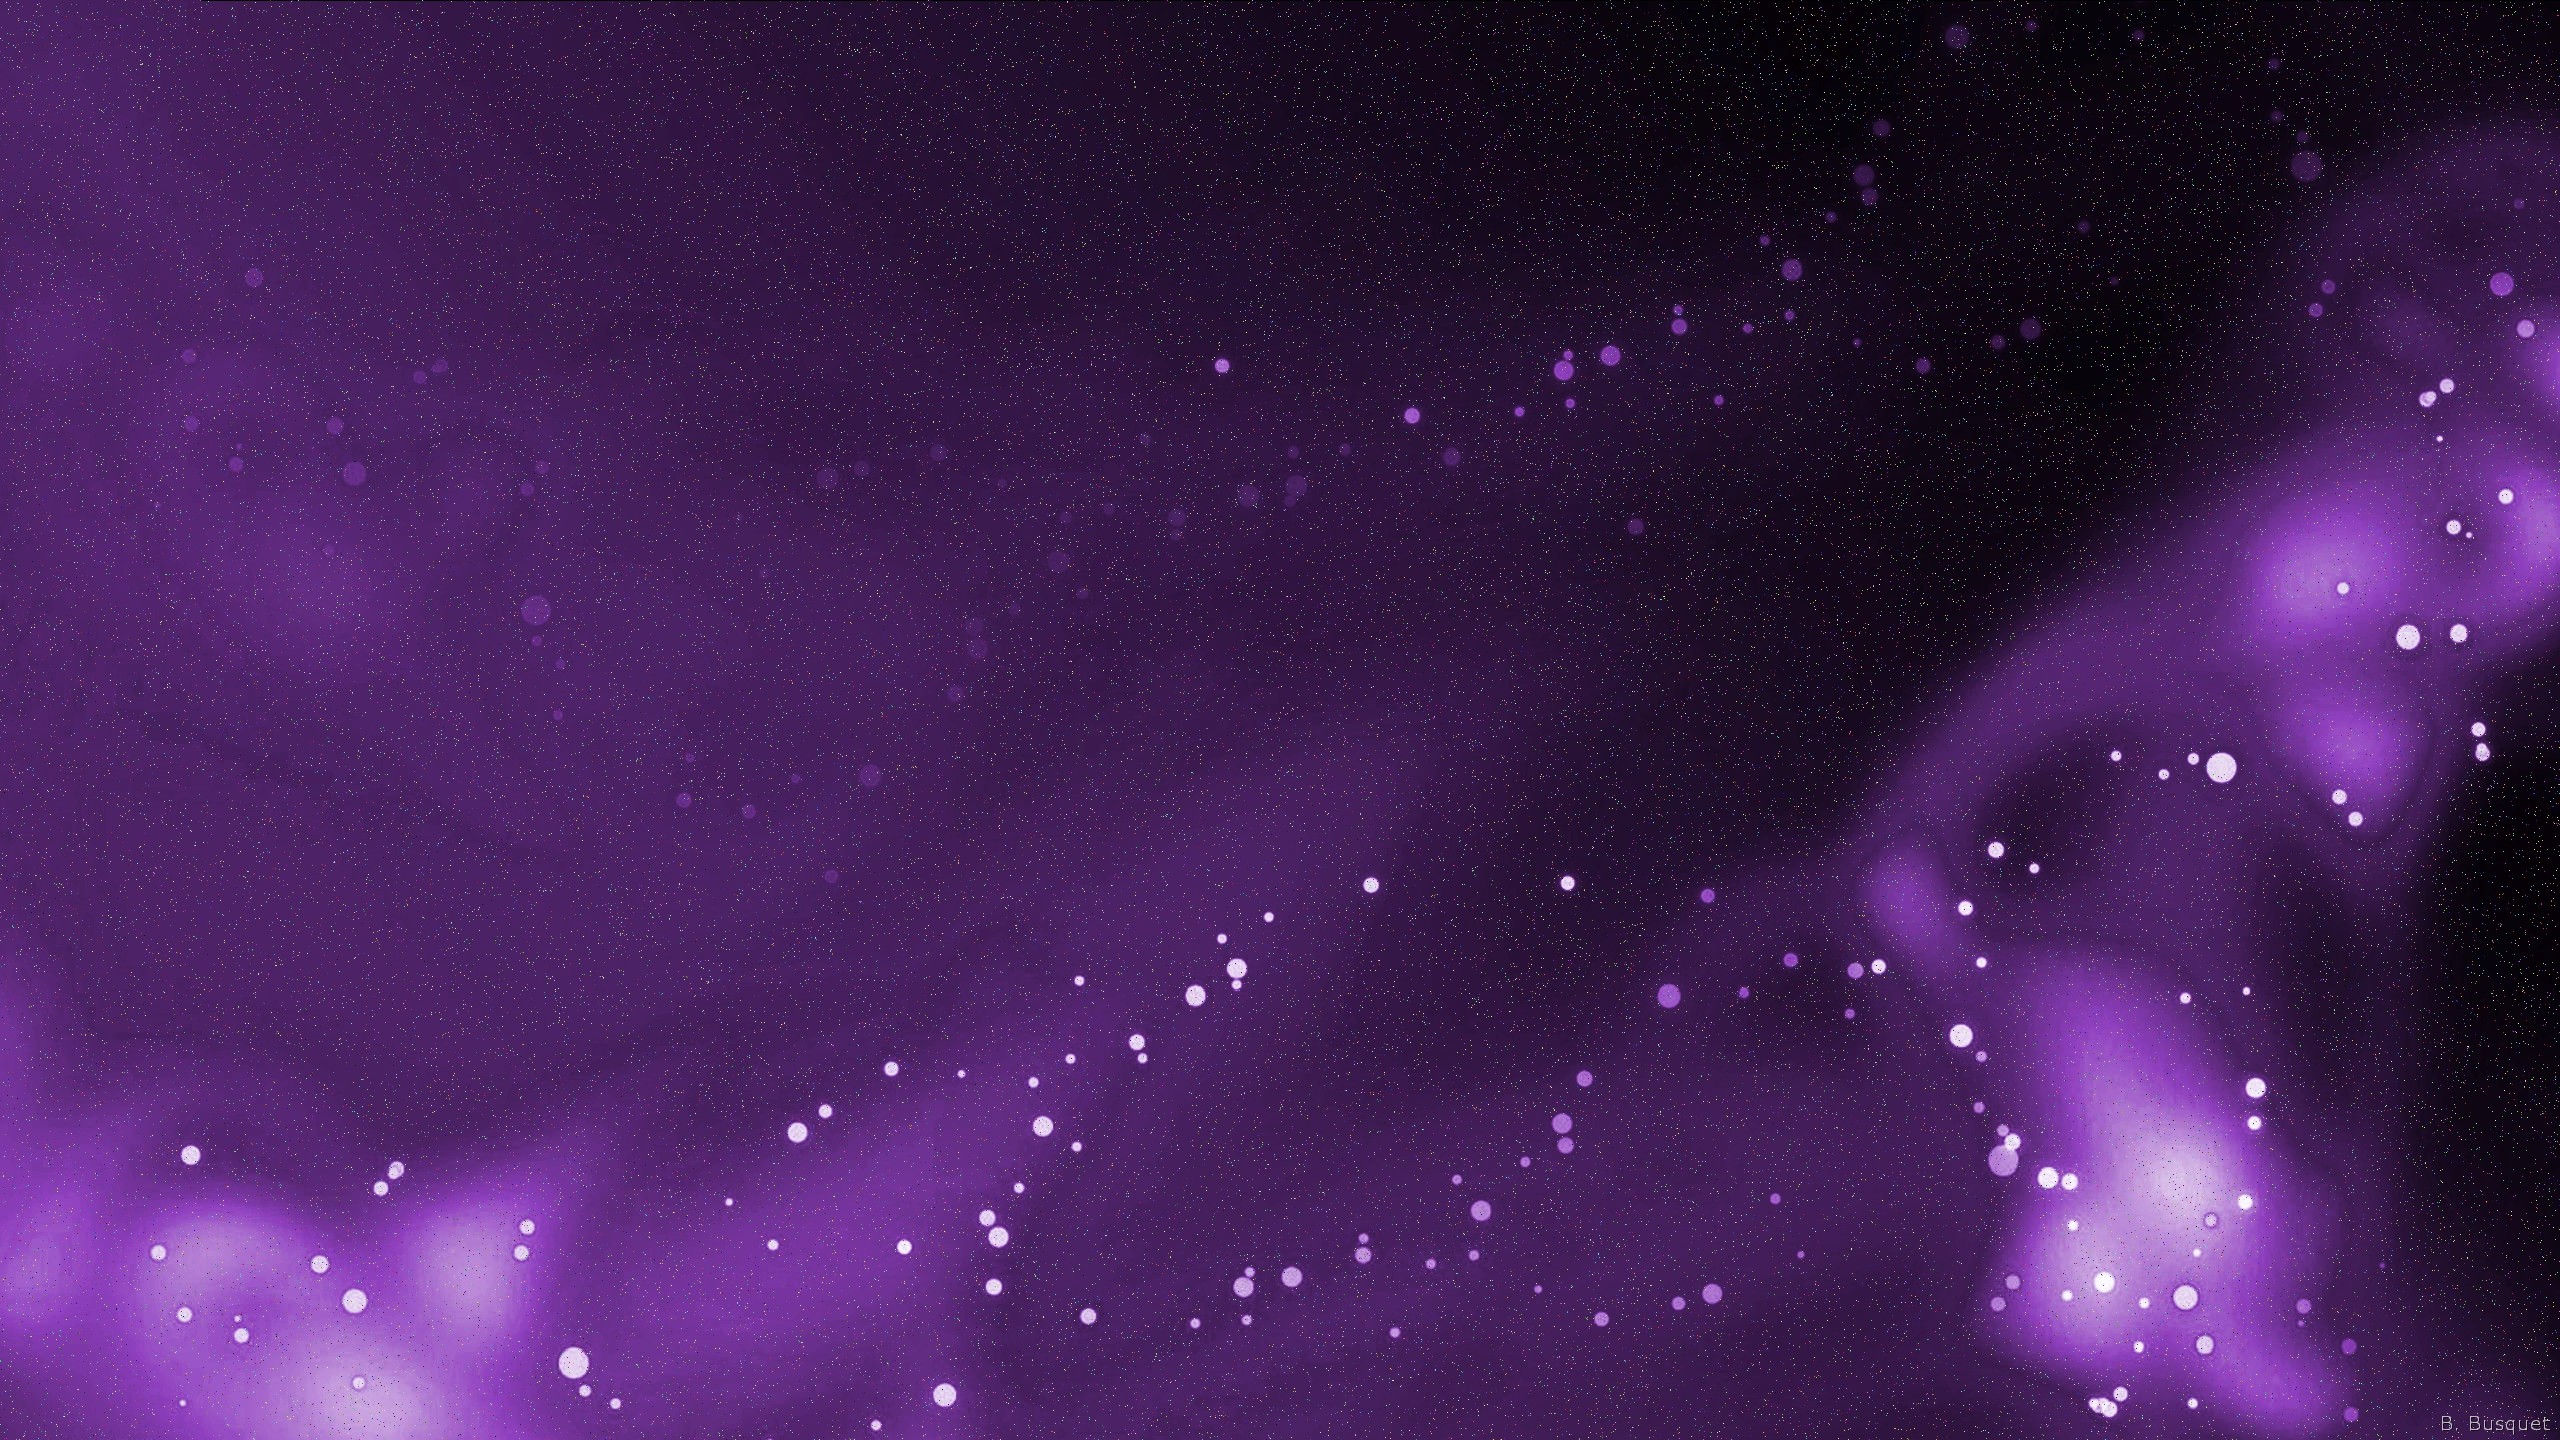 Purple Galaxy Wallpapers Widescreen For Desktop Wallpaper 2560 x 1440 px  1.08 MB planets colorful purple